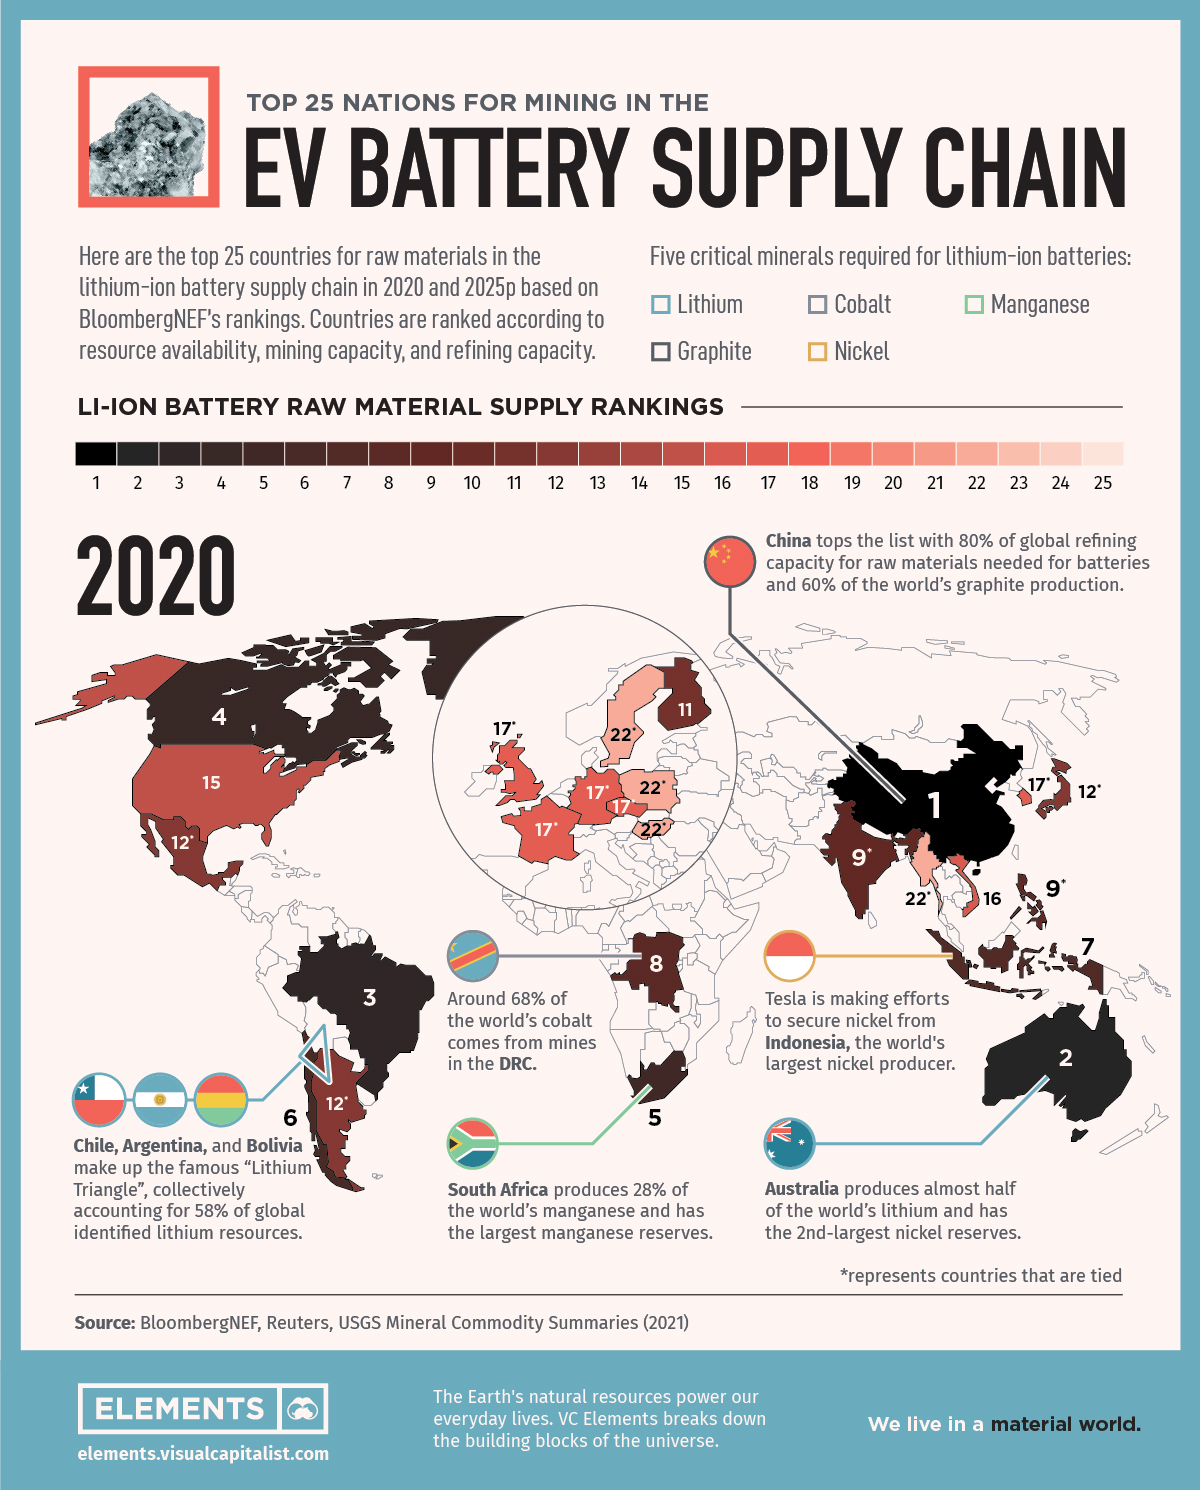 Ranked: Top 25 Nations Producing Battery Metals for the EV Supply Chain